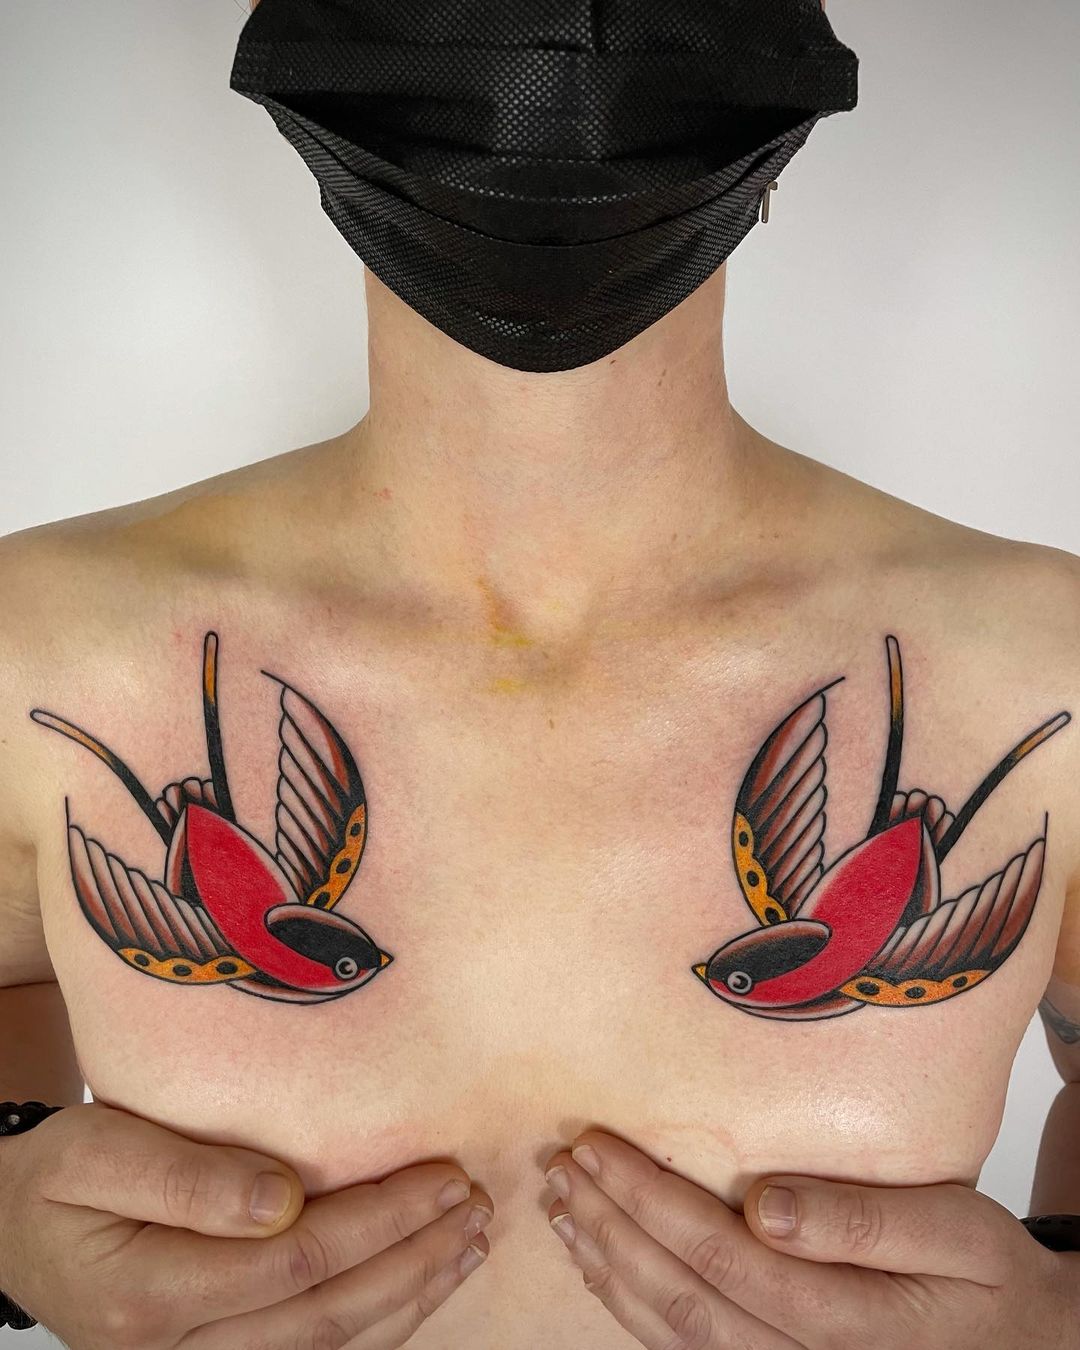 The History Behind the Art What Traditional Tattoos Mean